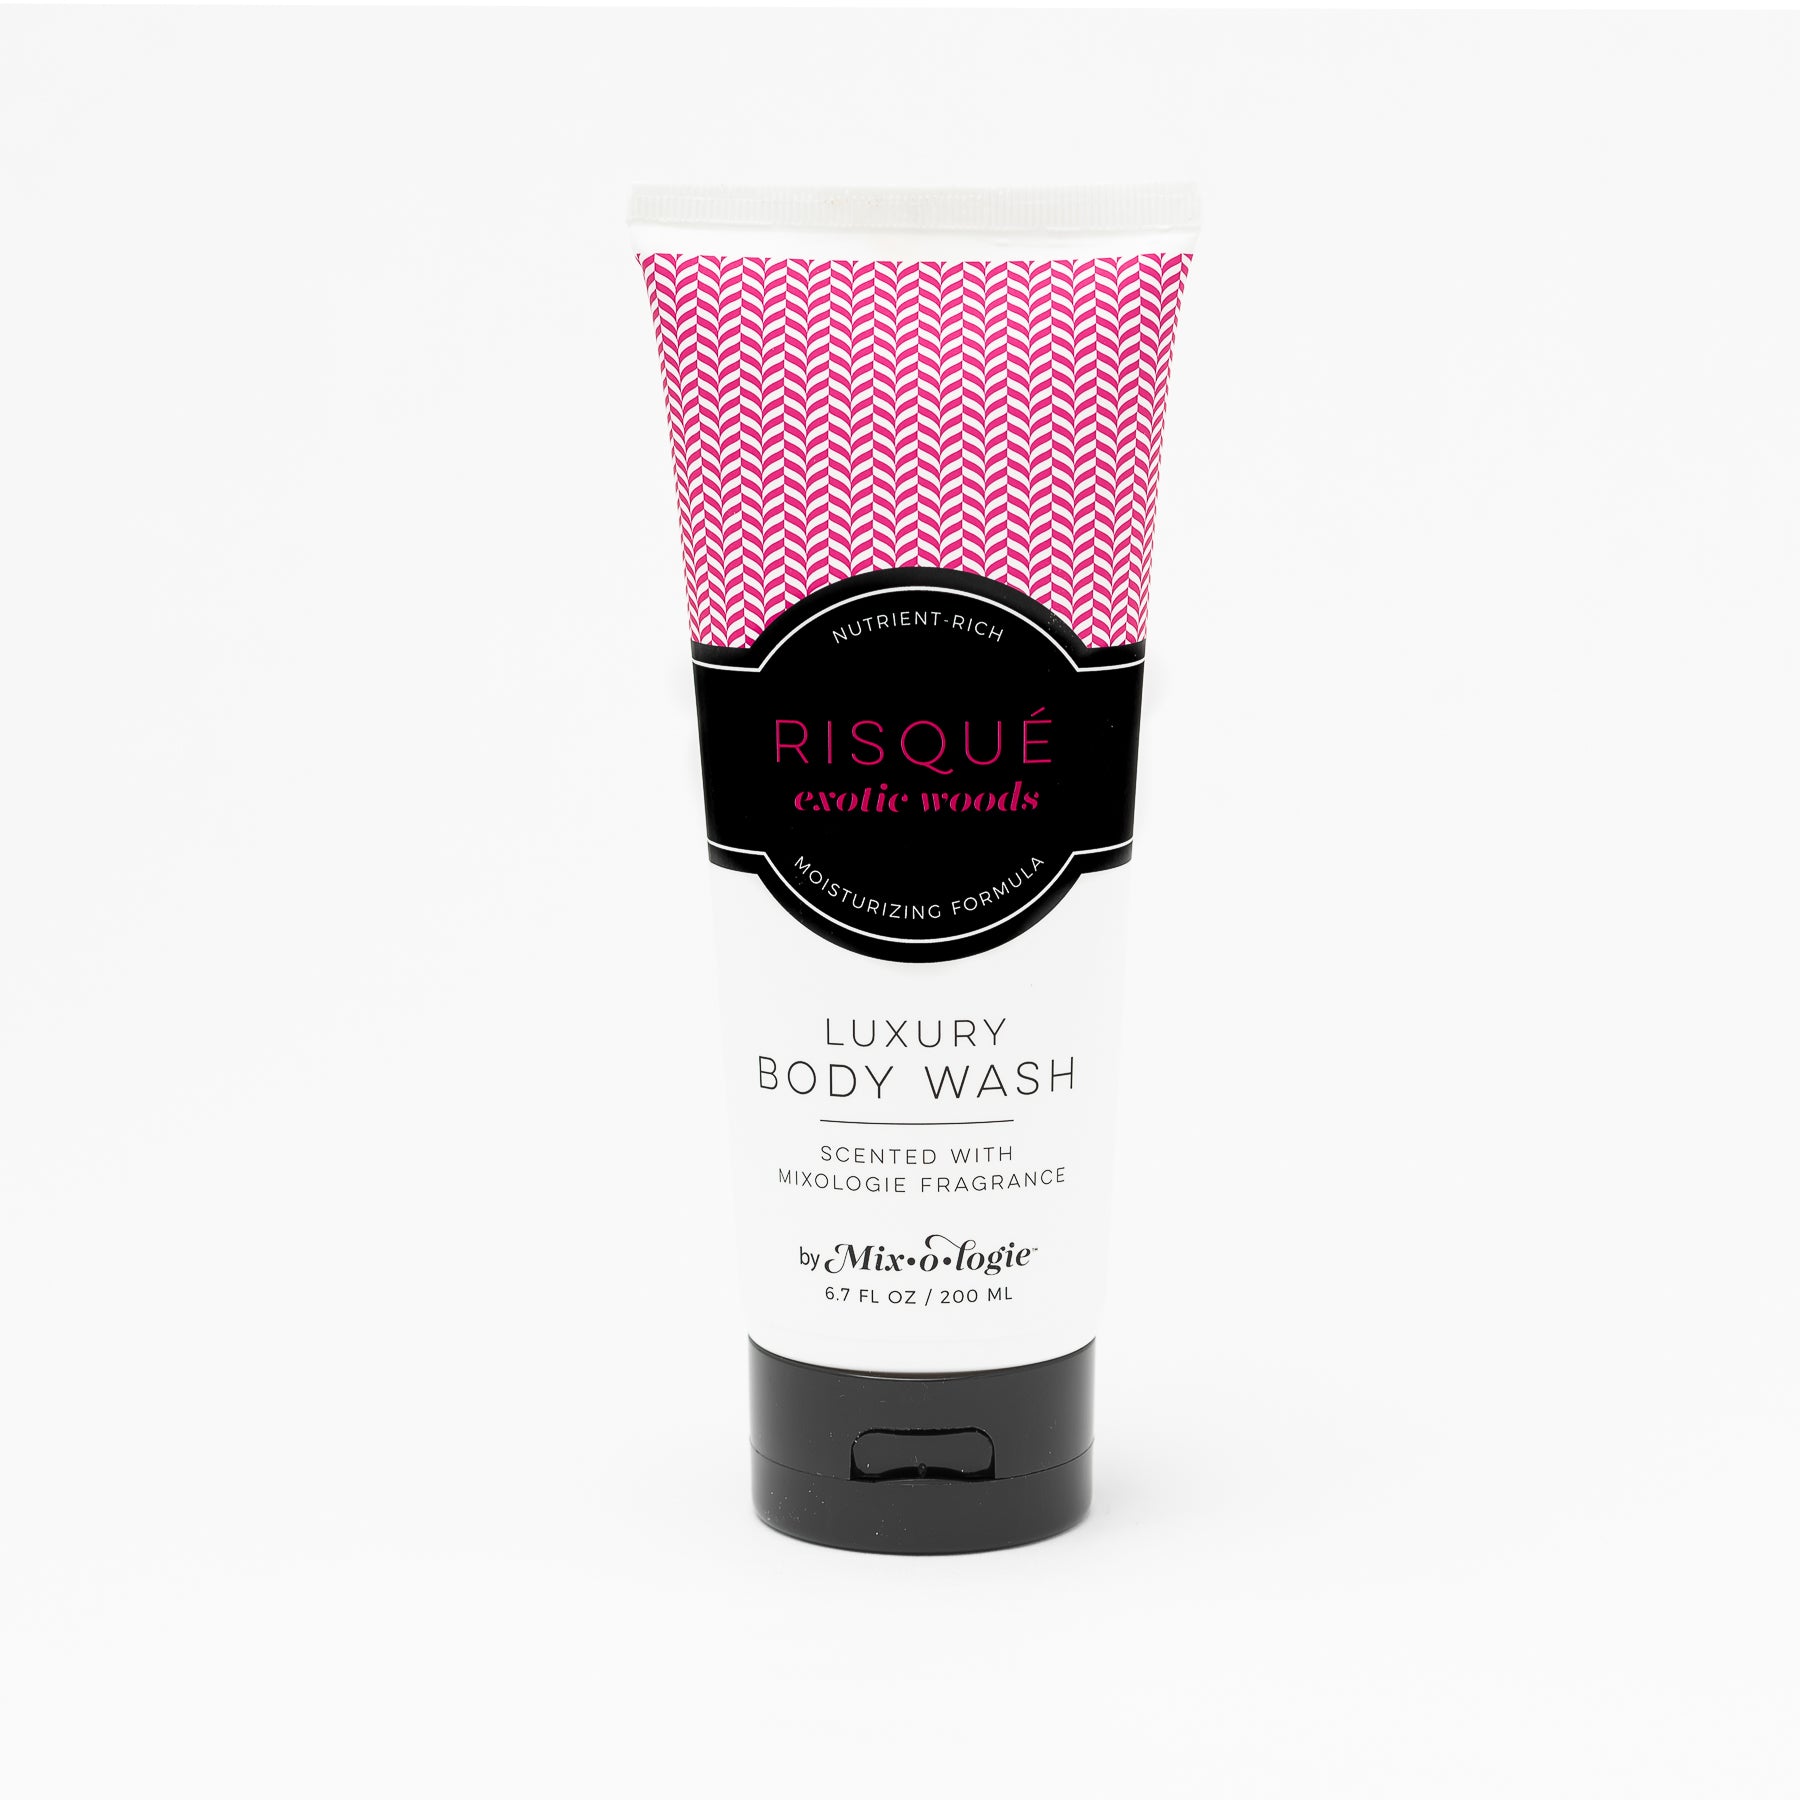 Luxury Body Wash in Risqué (Exotic Woods) in dark pink pattern package and black label with white background.